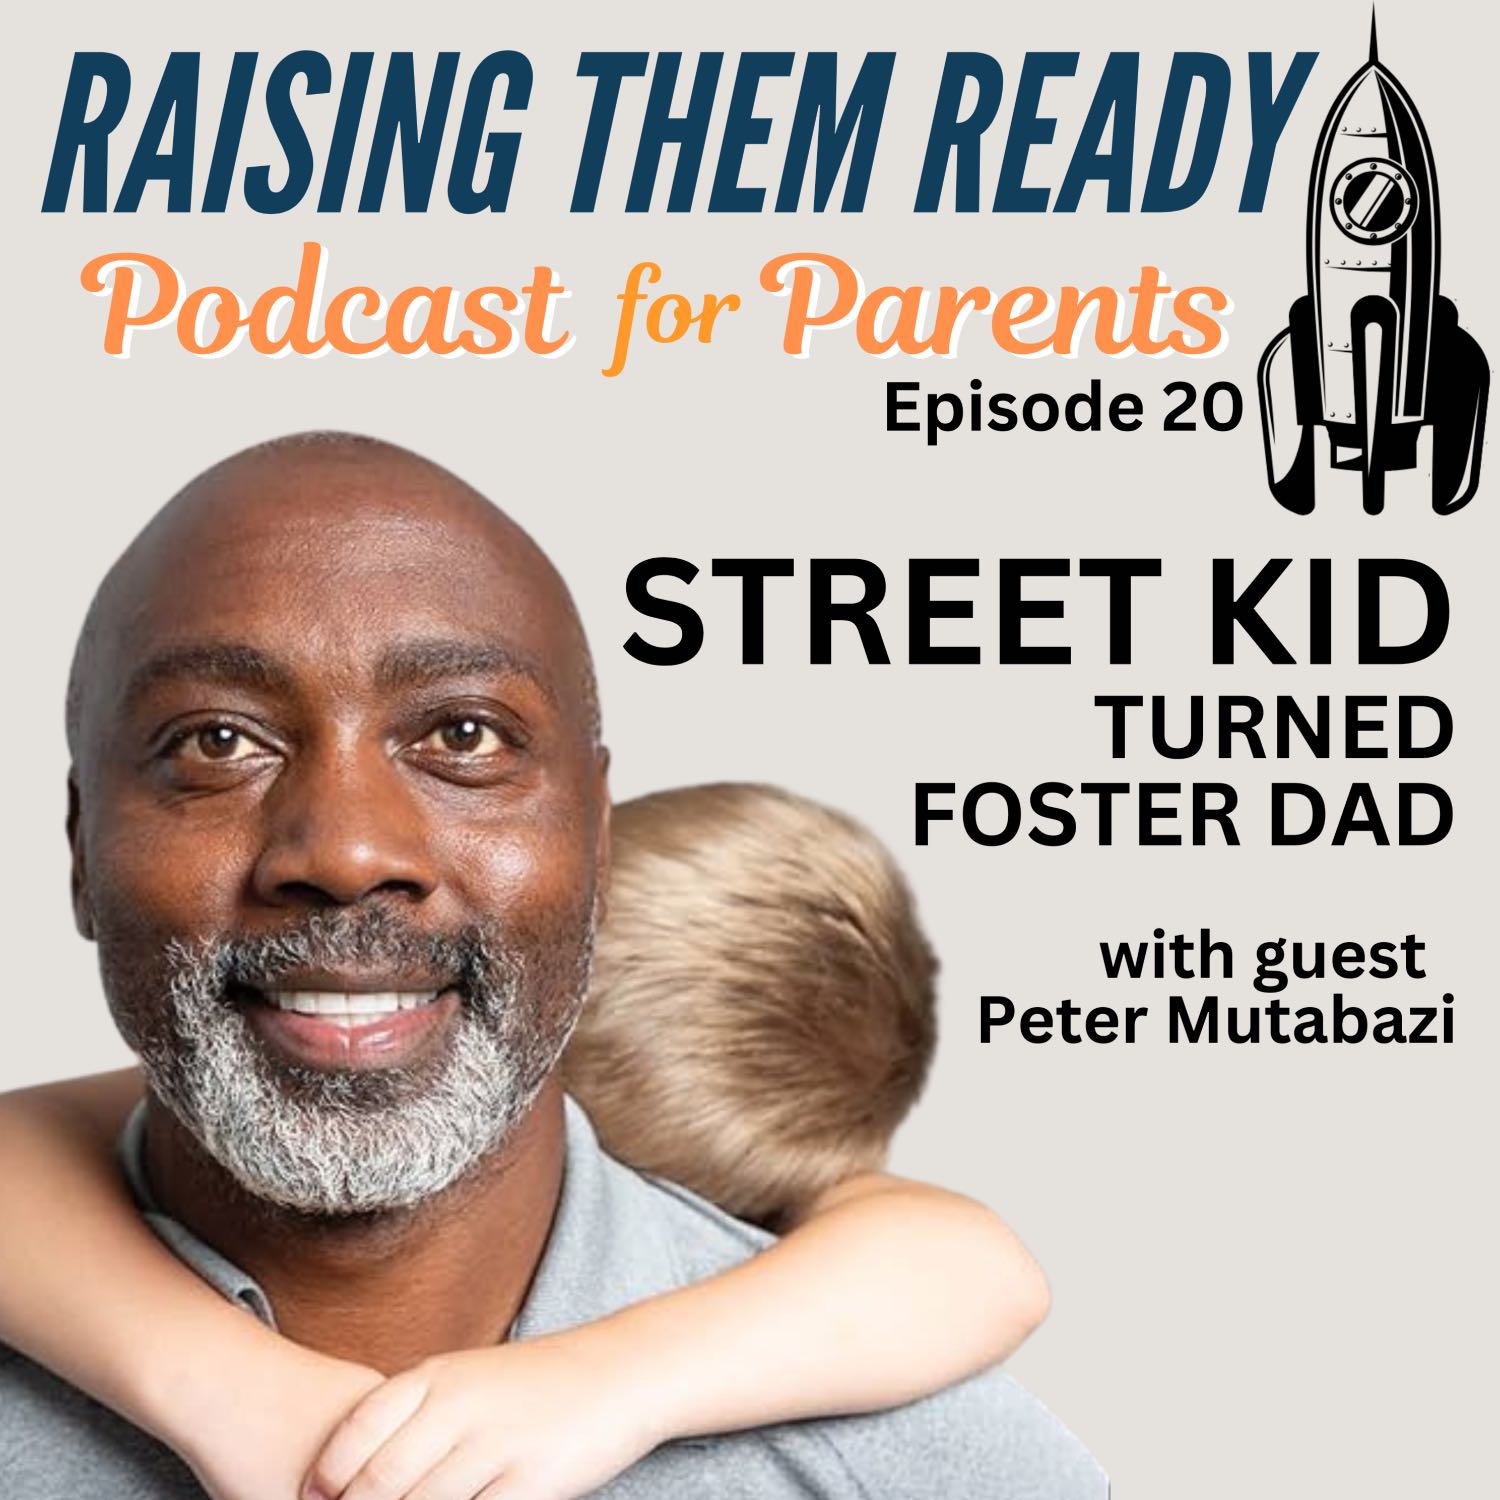 Street Kid Turned Foster Dad, with guest Peter Mutabazi